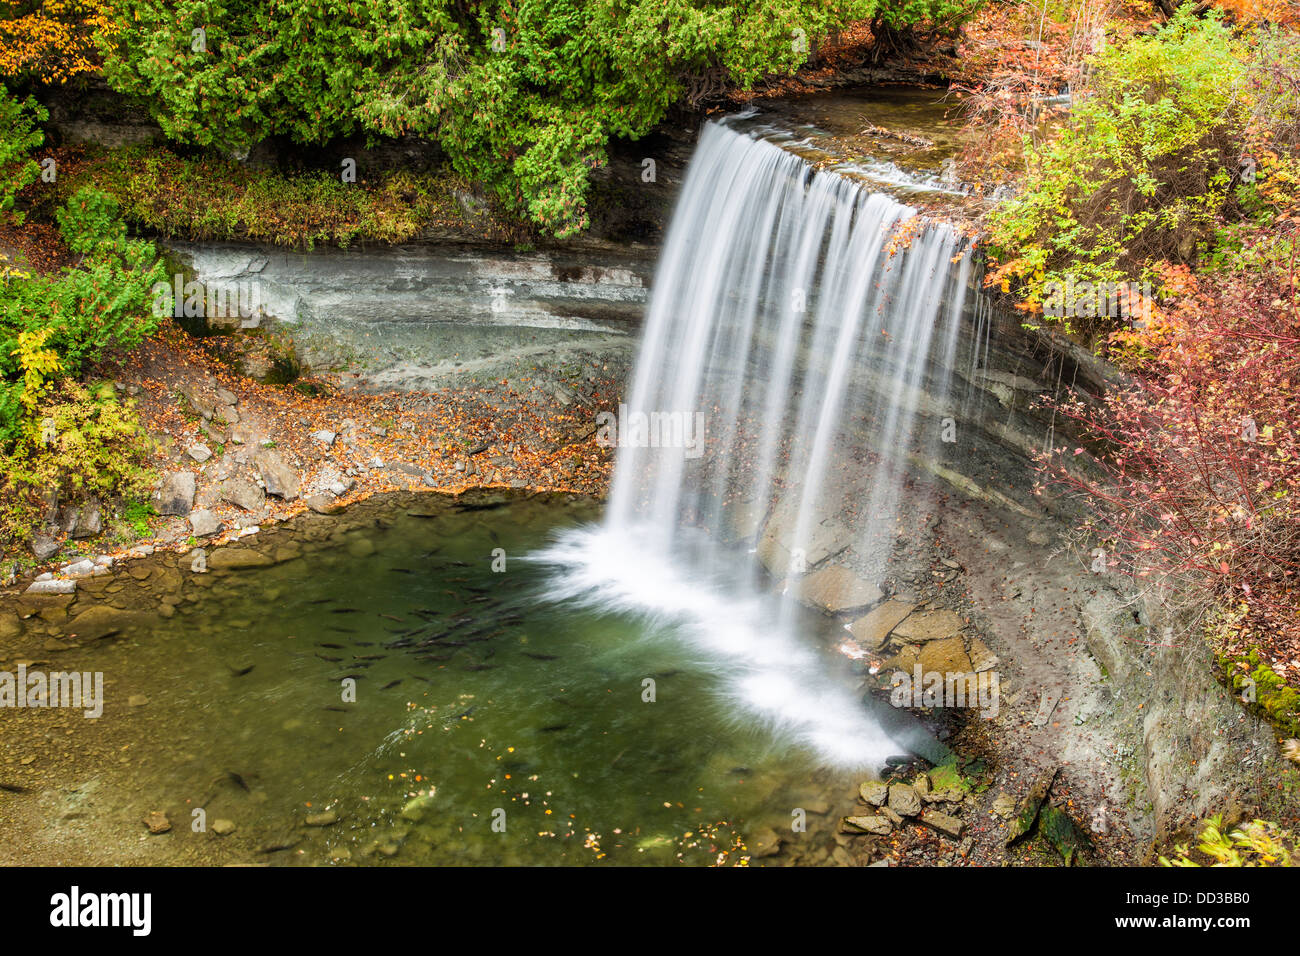 Bridal Veil Falls, Kagawong, Manitoulin Island, Ontario, in autumn, with salmon spawning in its pool. Stock Photo